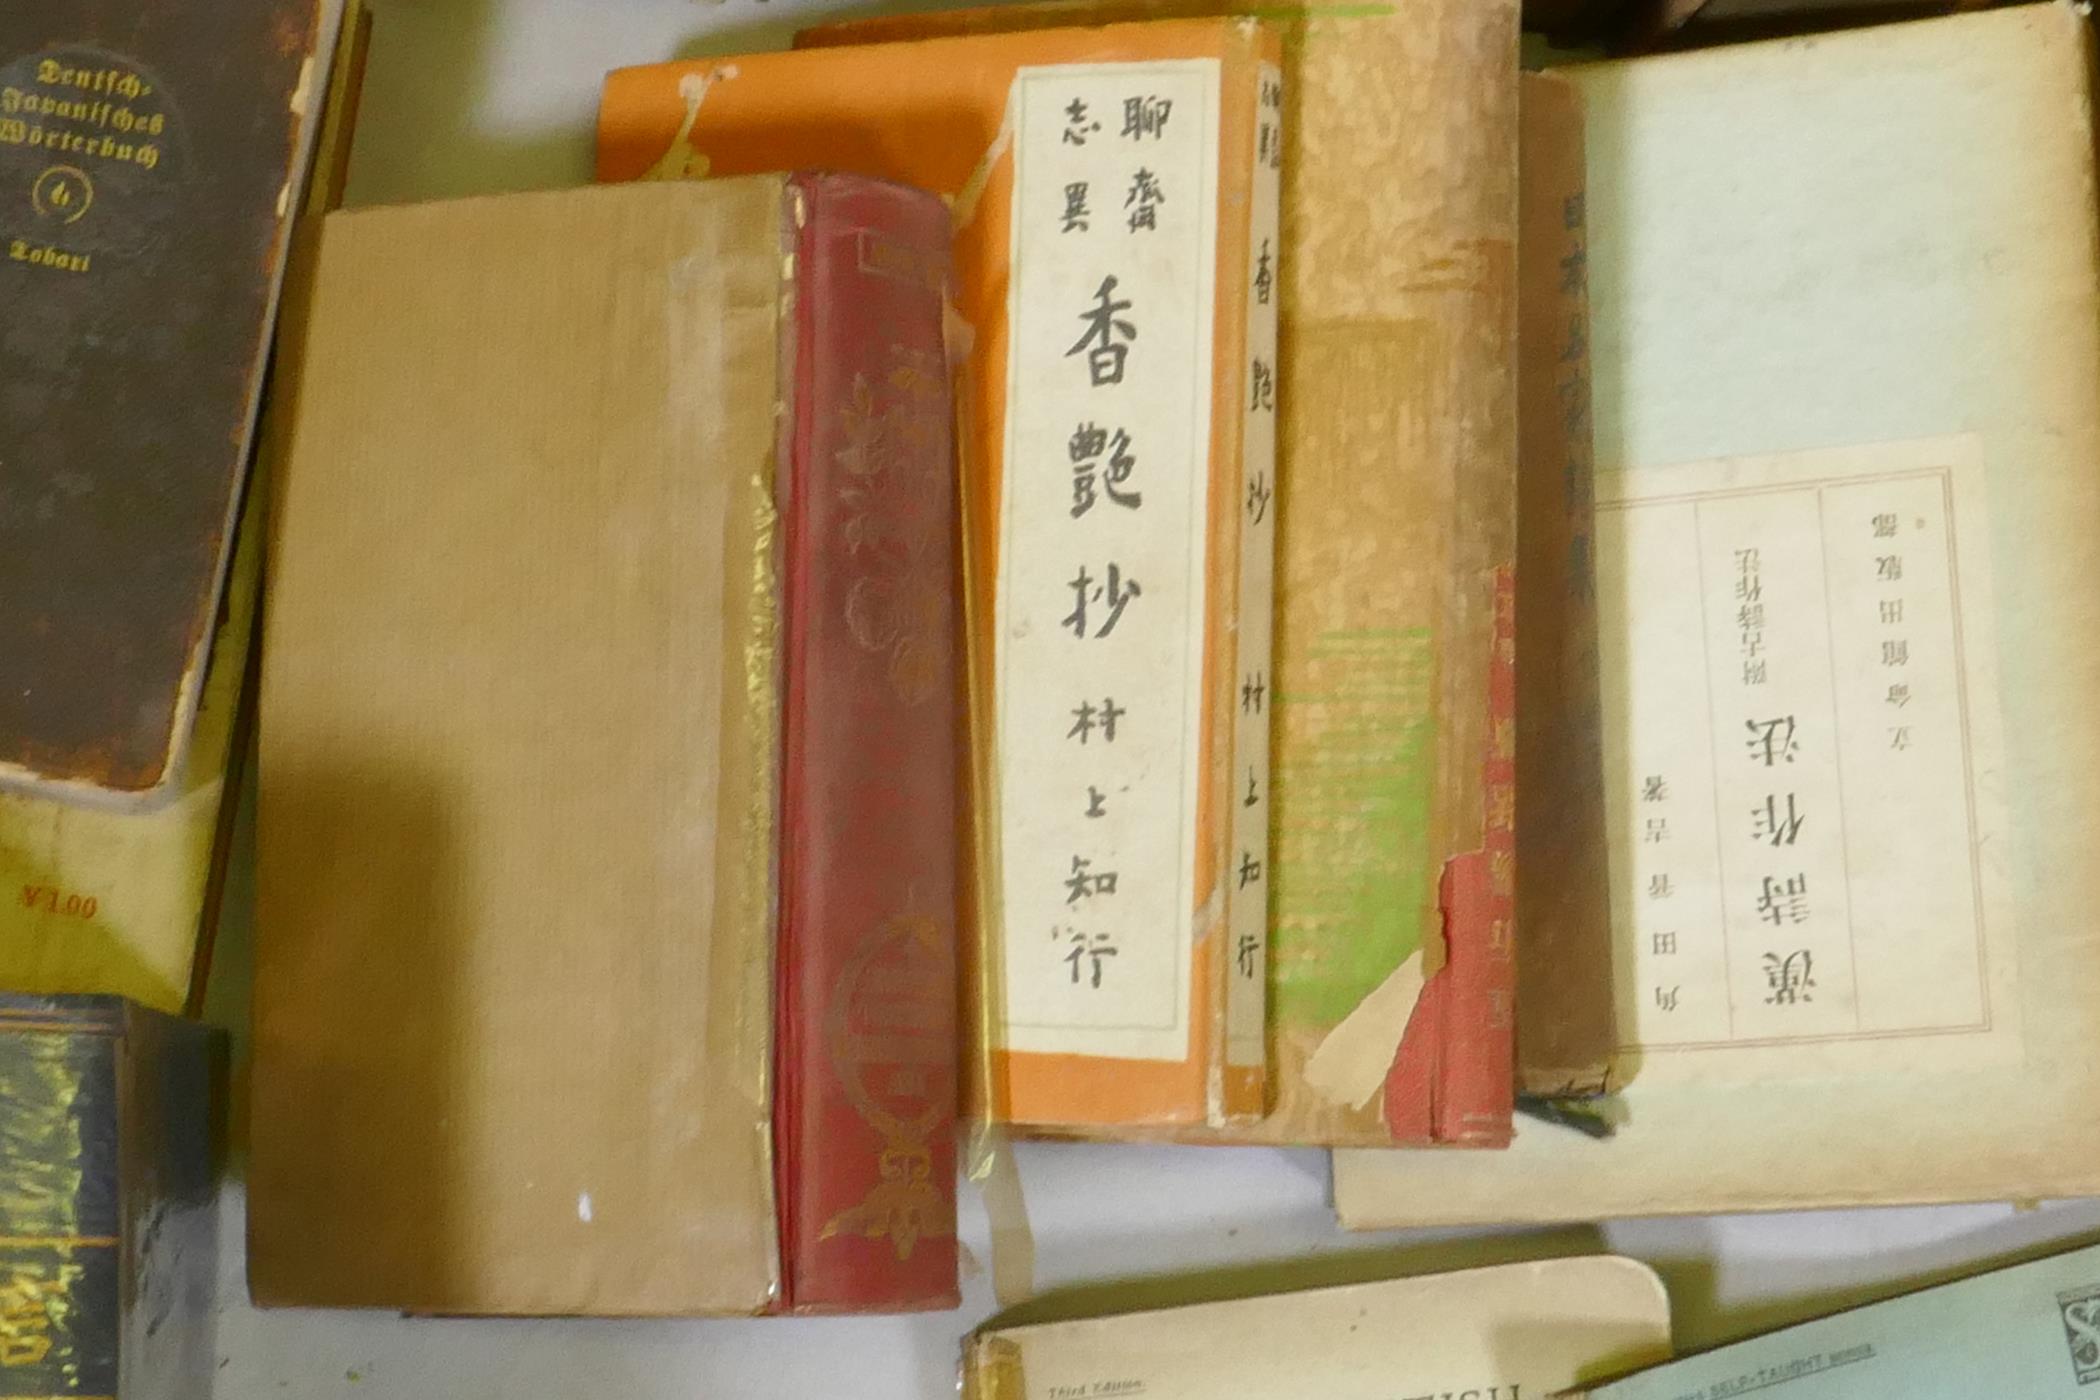 A large collection of Japanese books, Meiji literature, Japanese English/German dictionaries, - Image 12 of 12